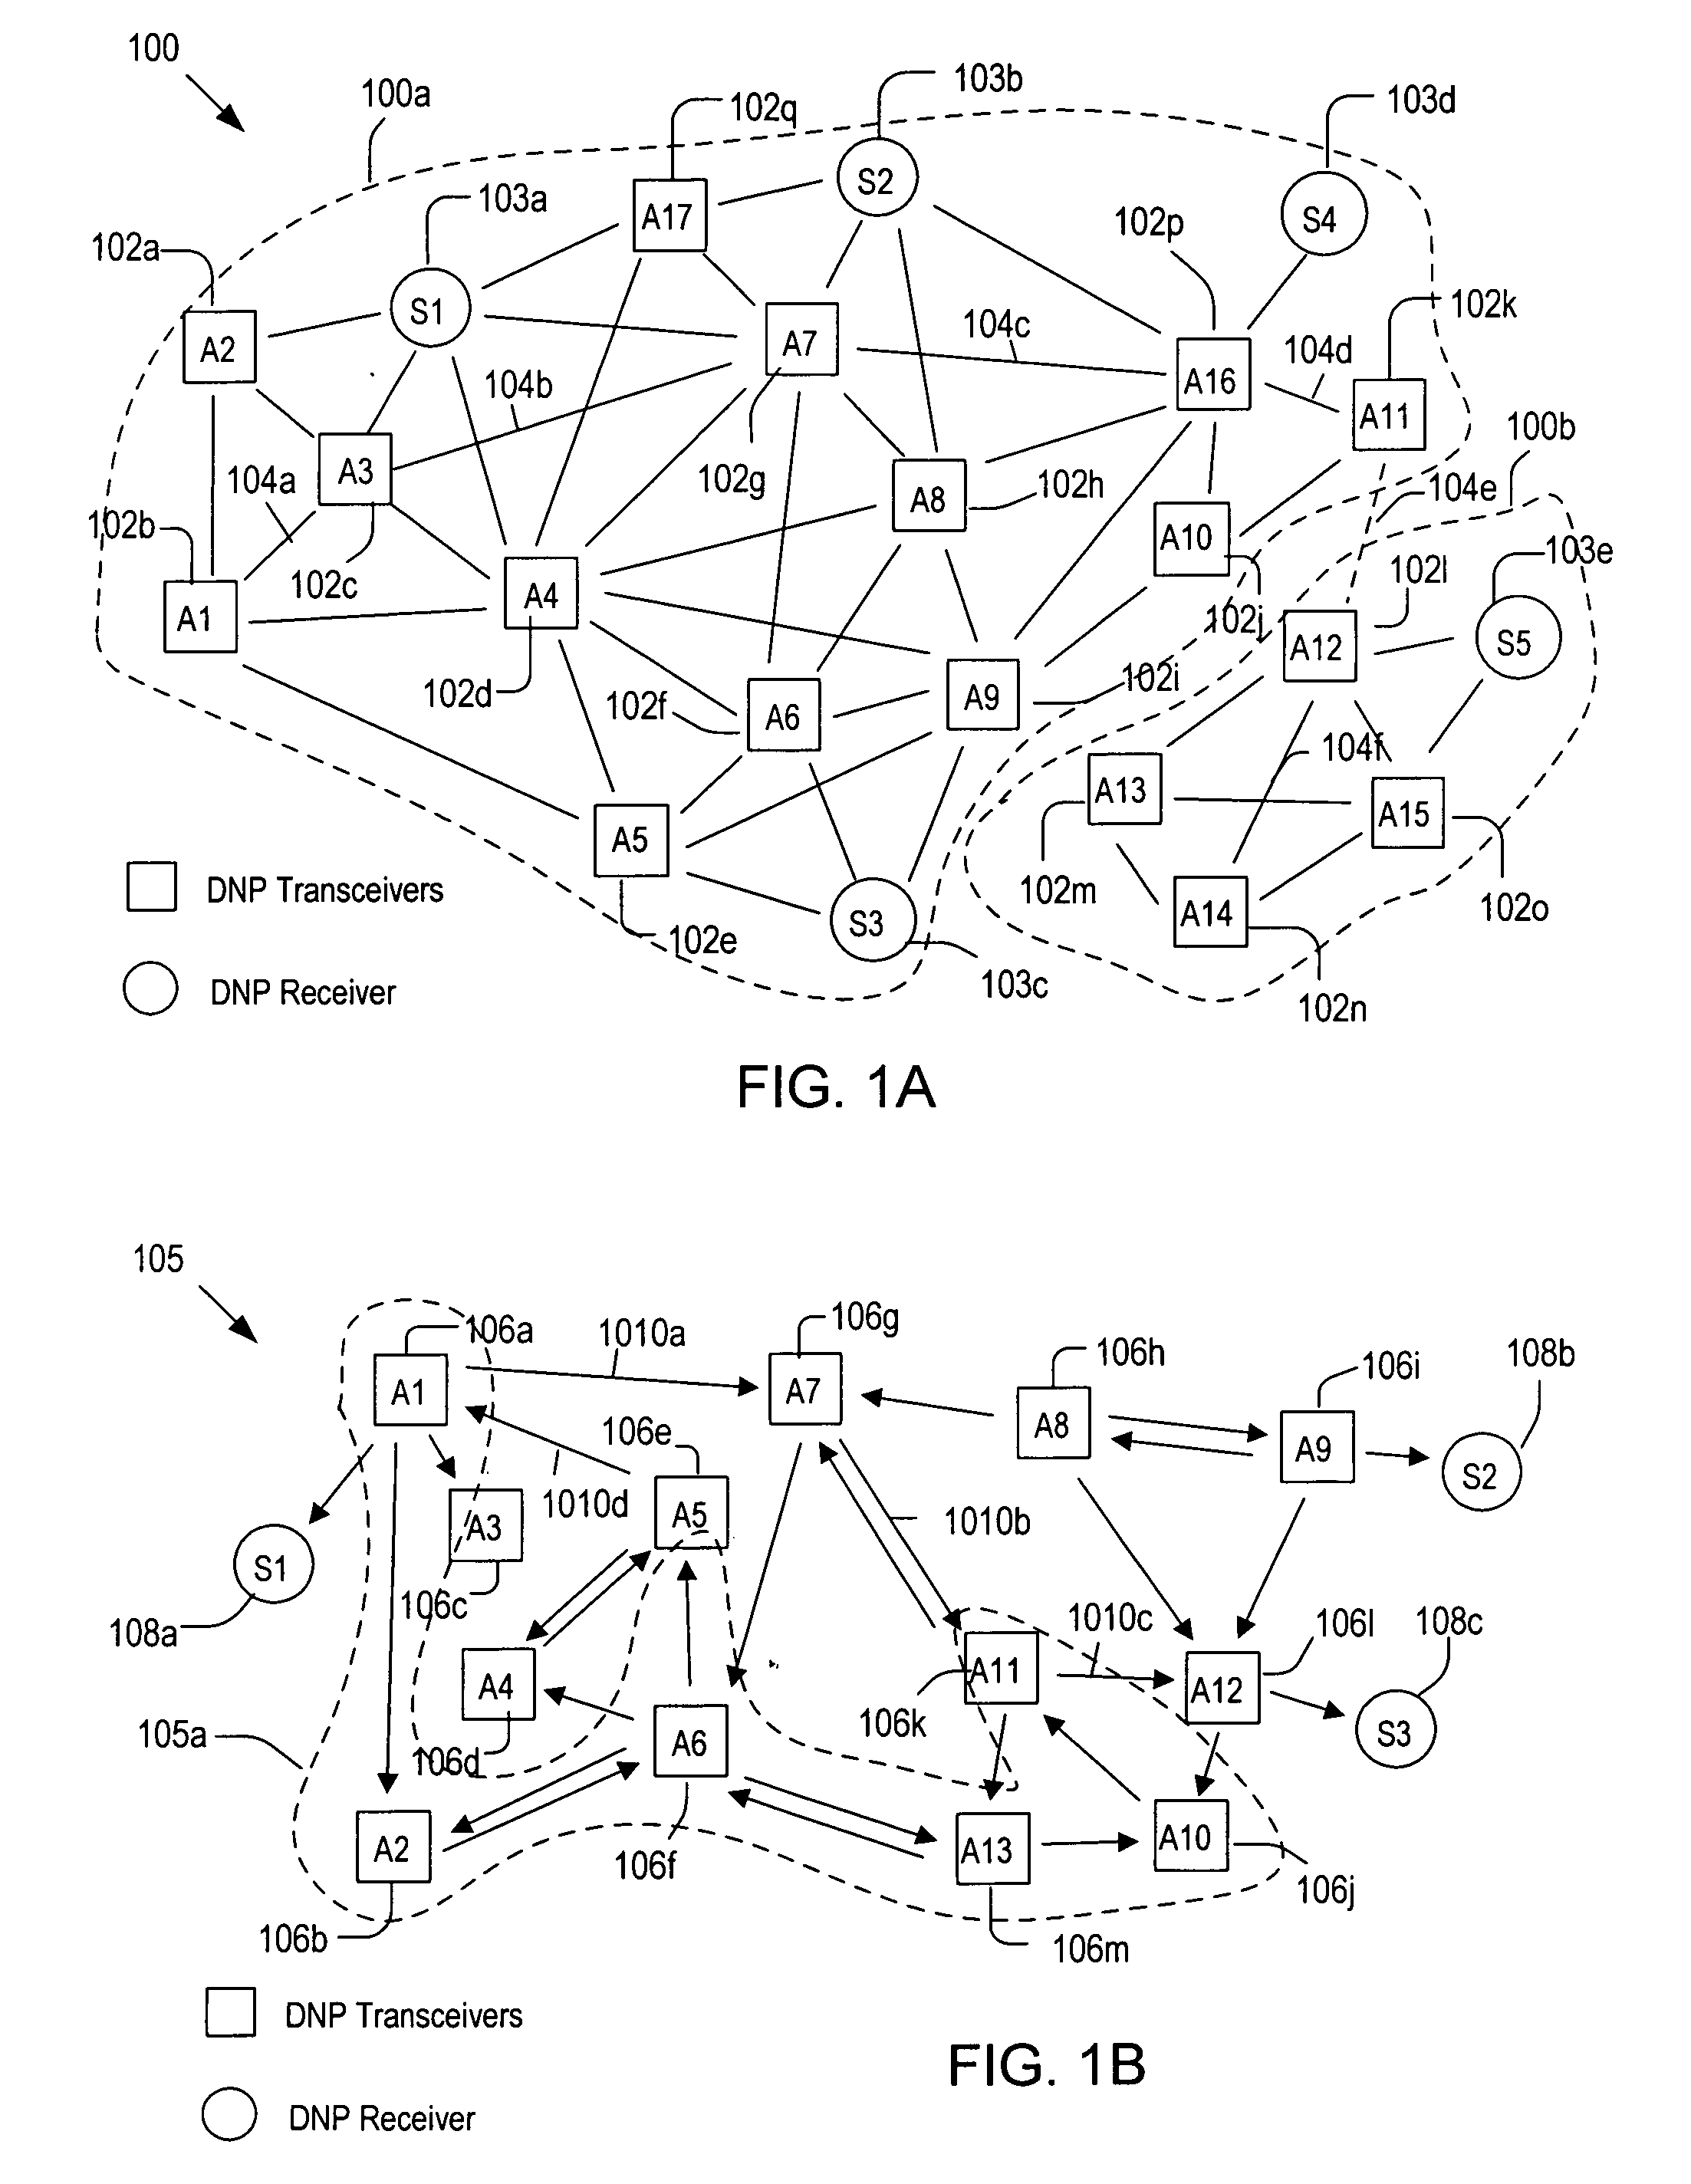 Methods of networking interrogation devices for structural conditions